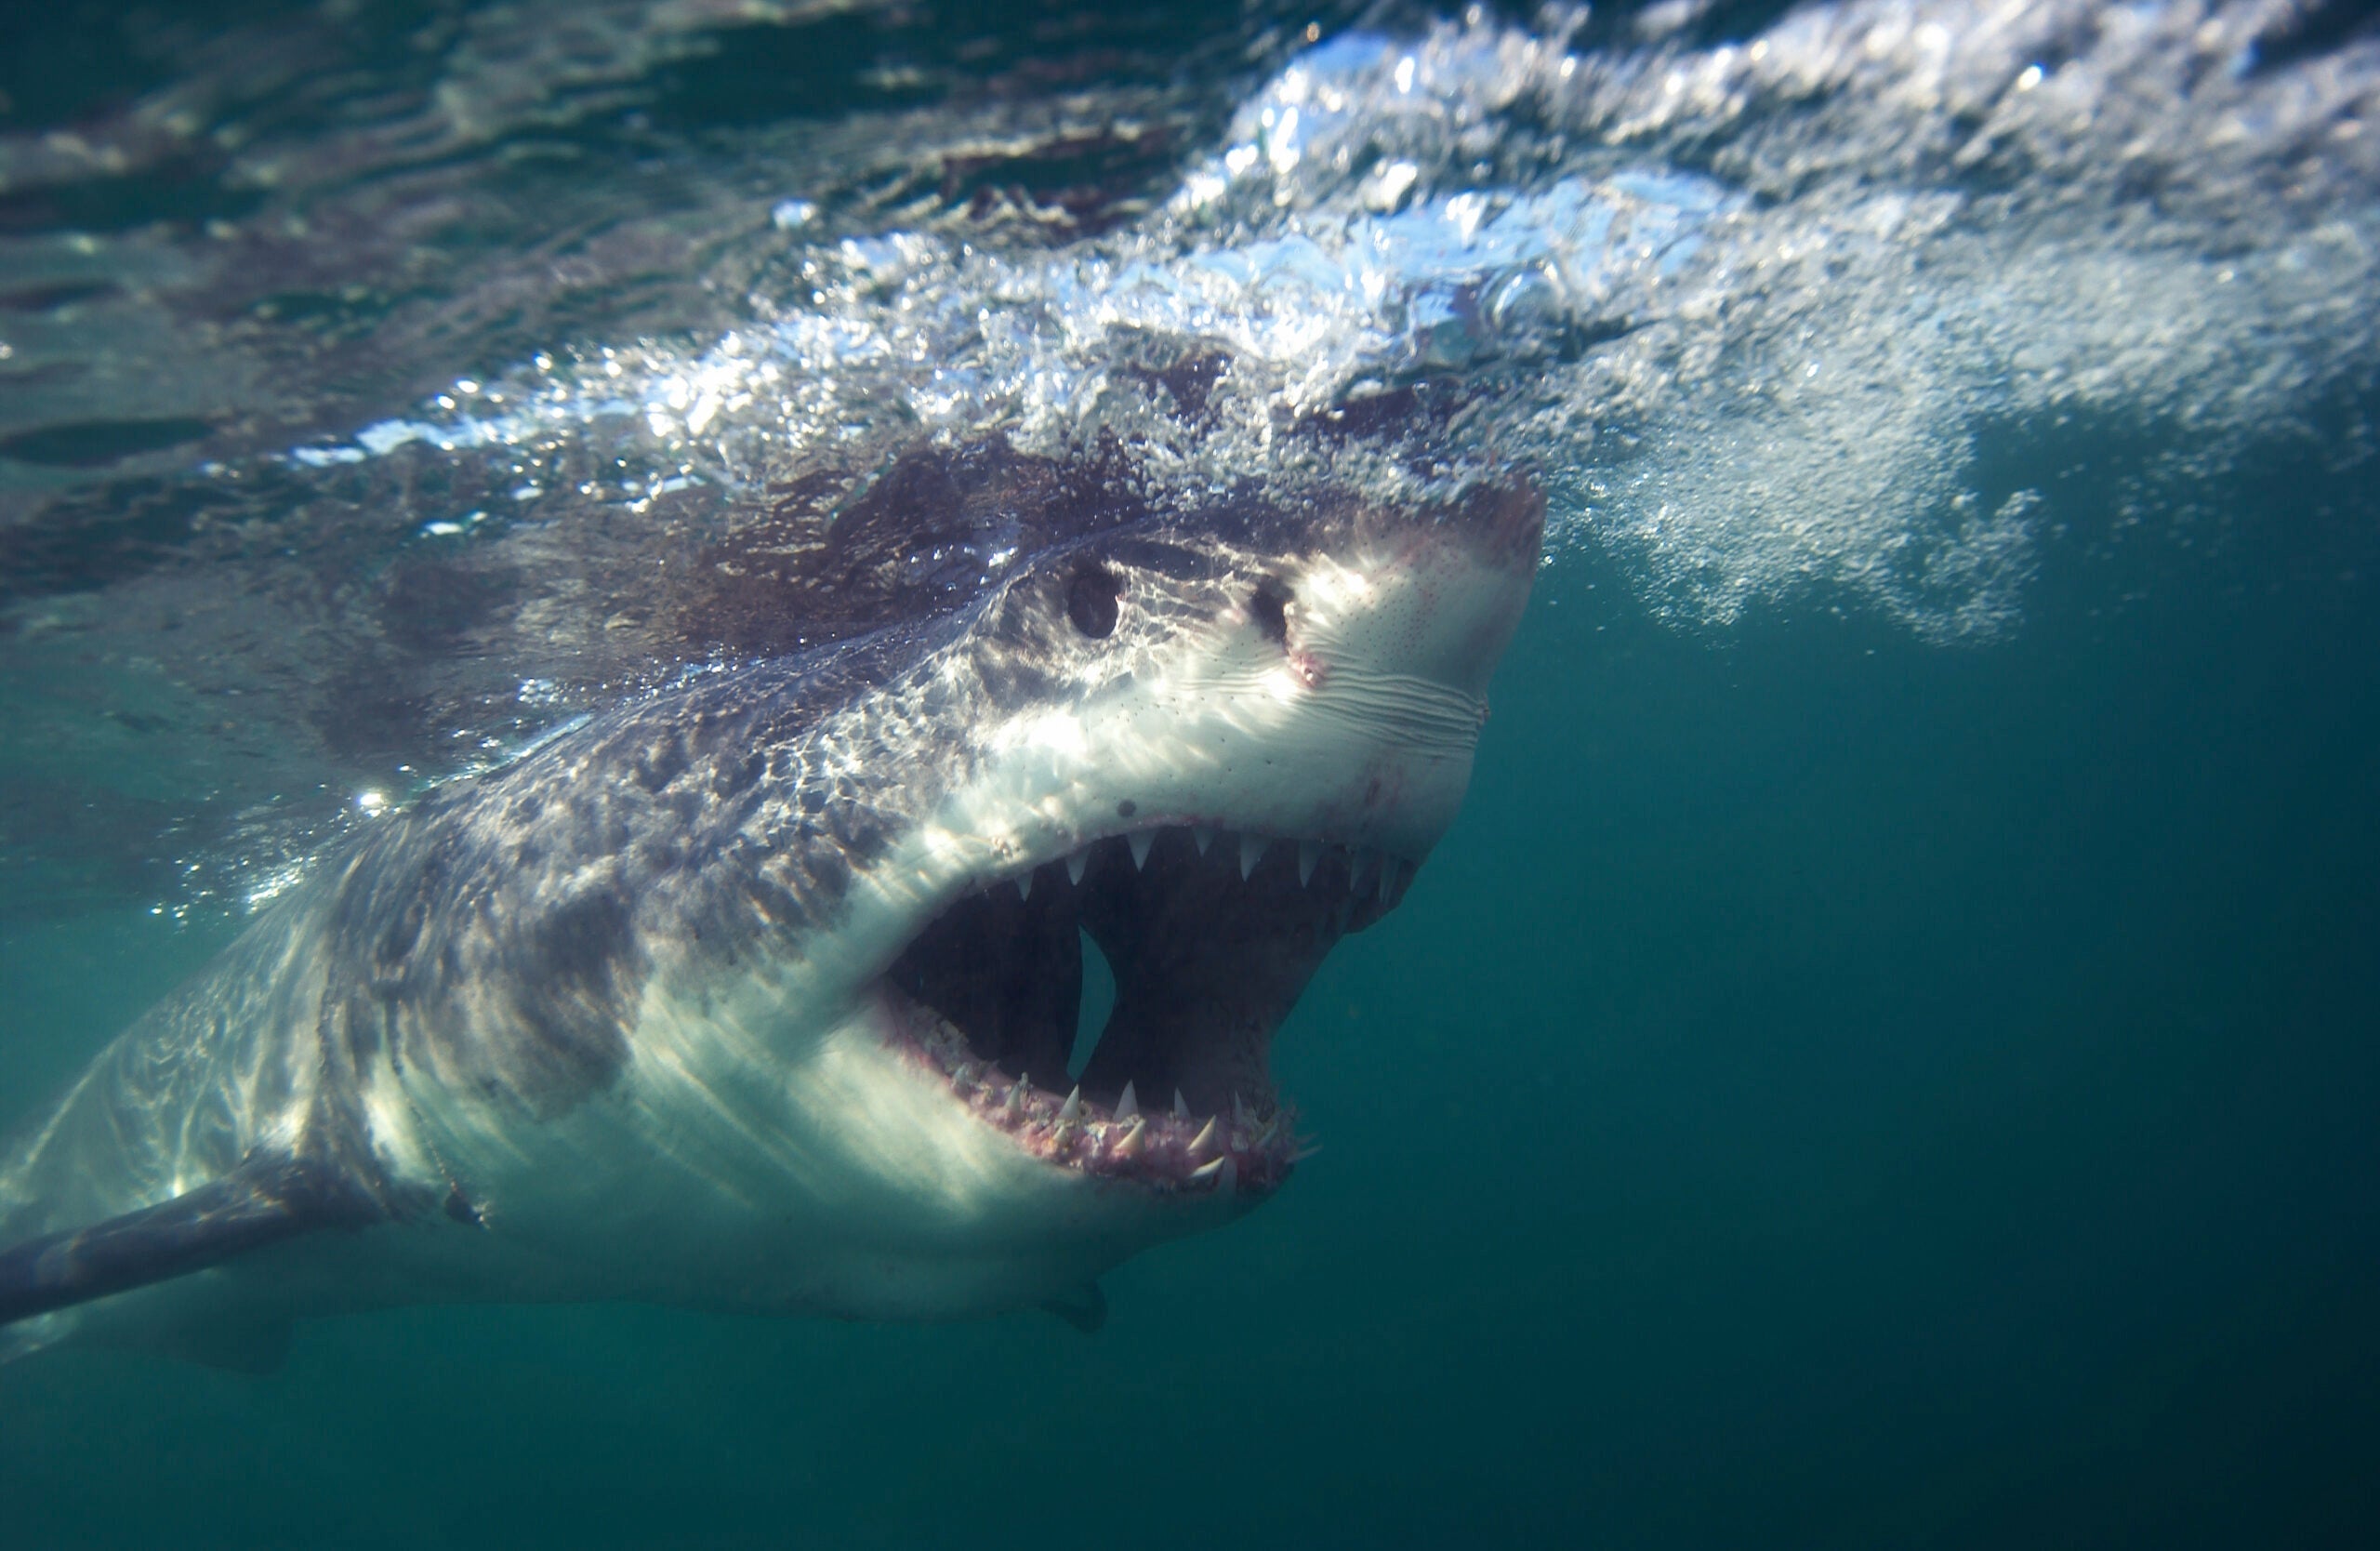 Shark attacks: How safe are you in the water?